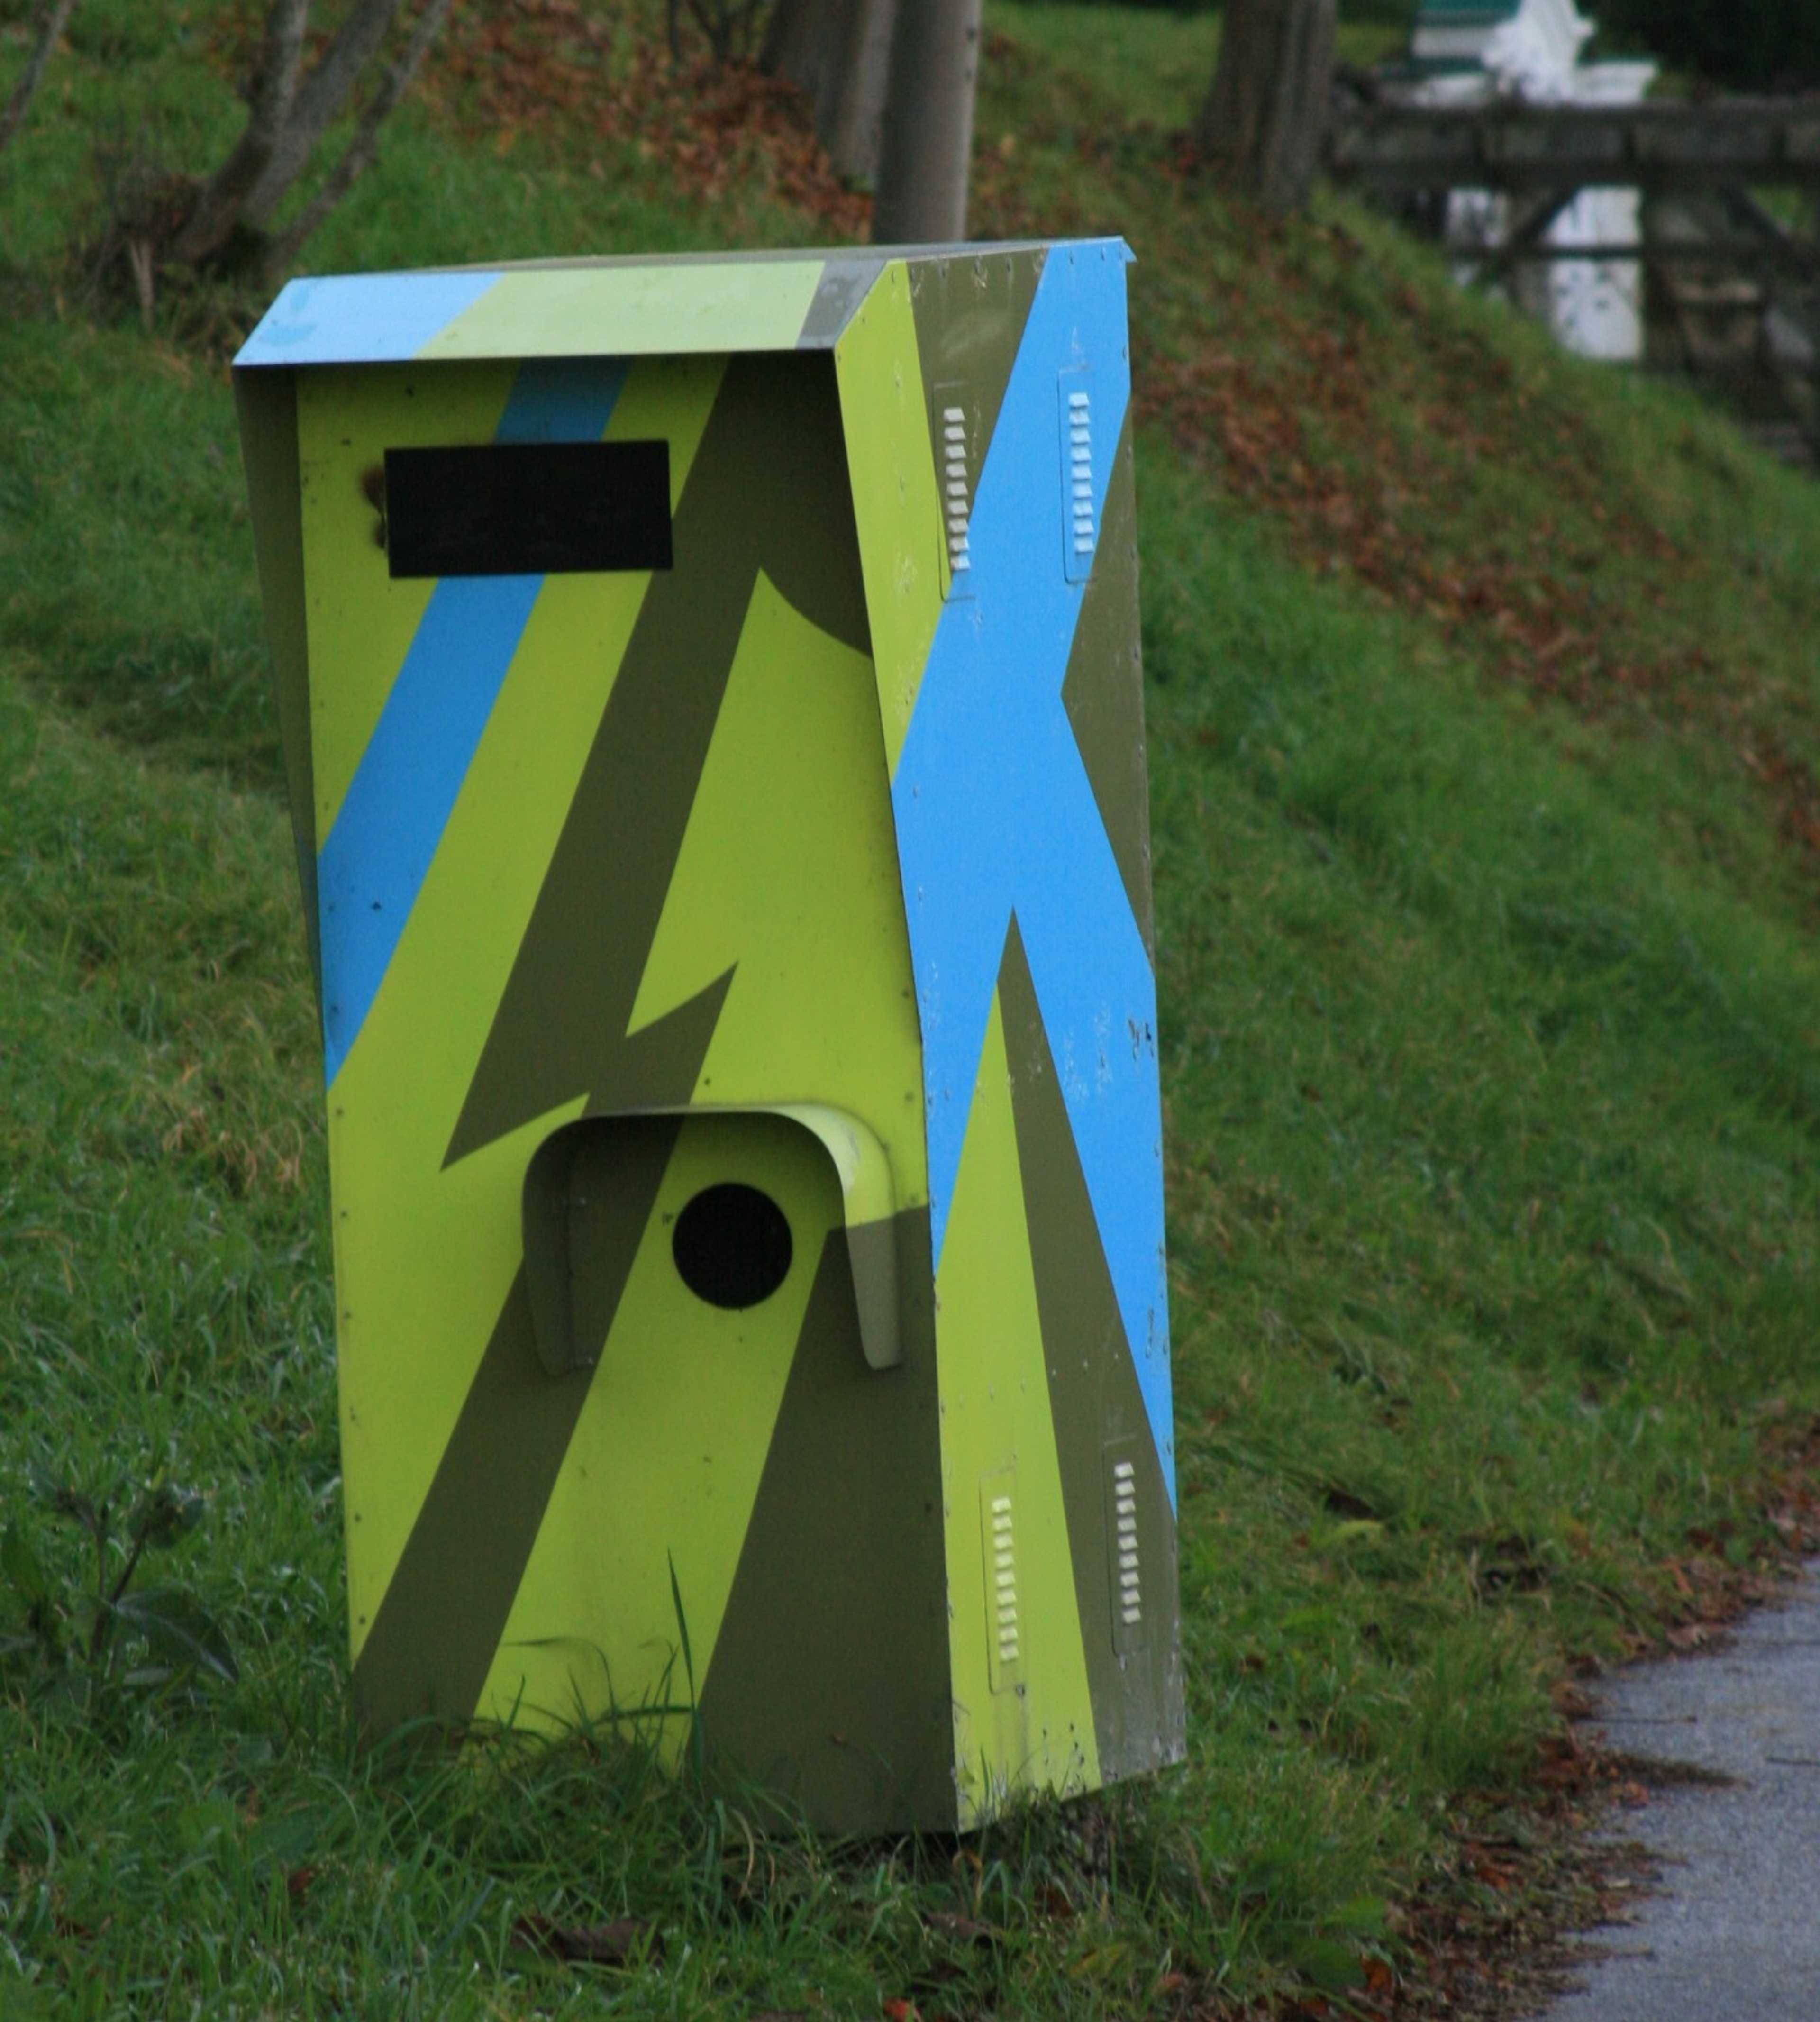 Dazzle camouflage-painted speed camera in Austria